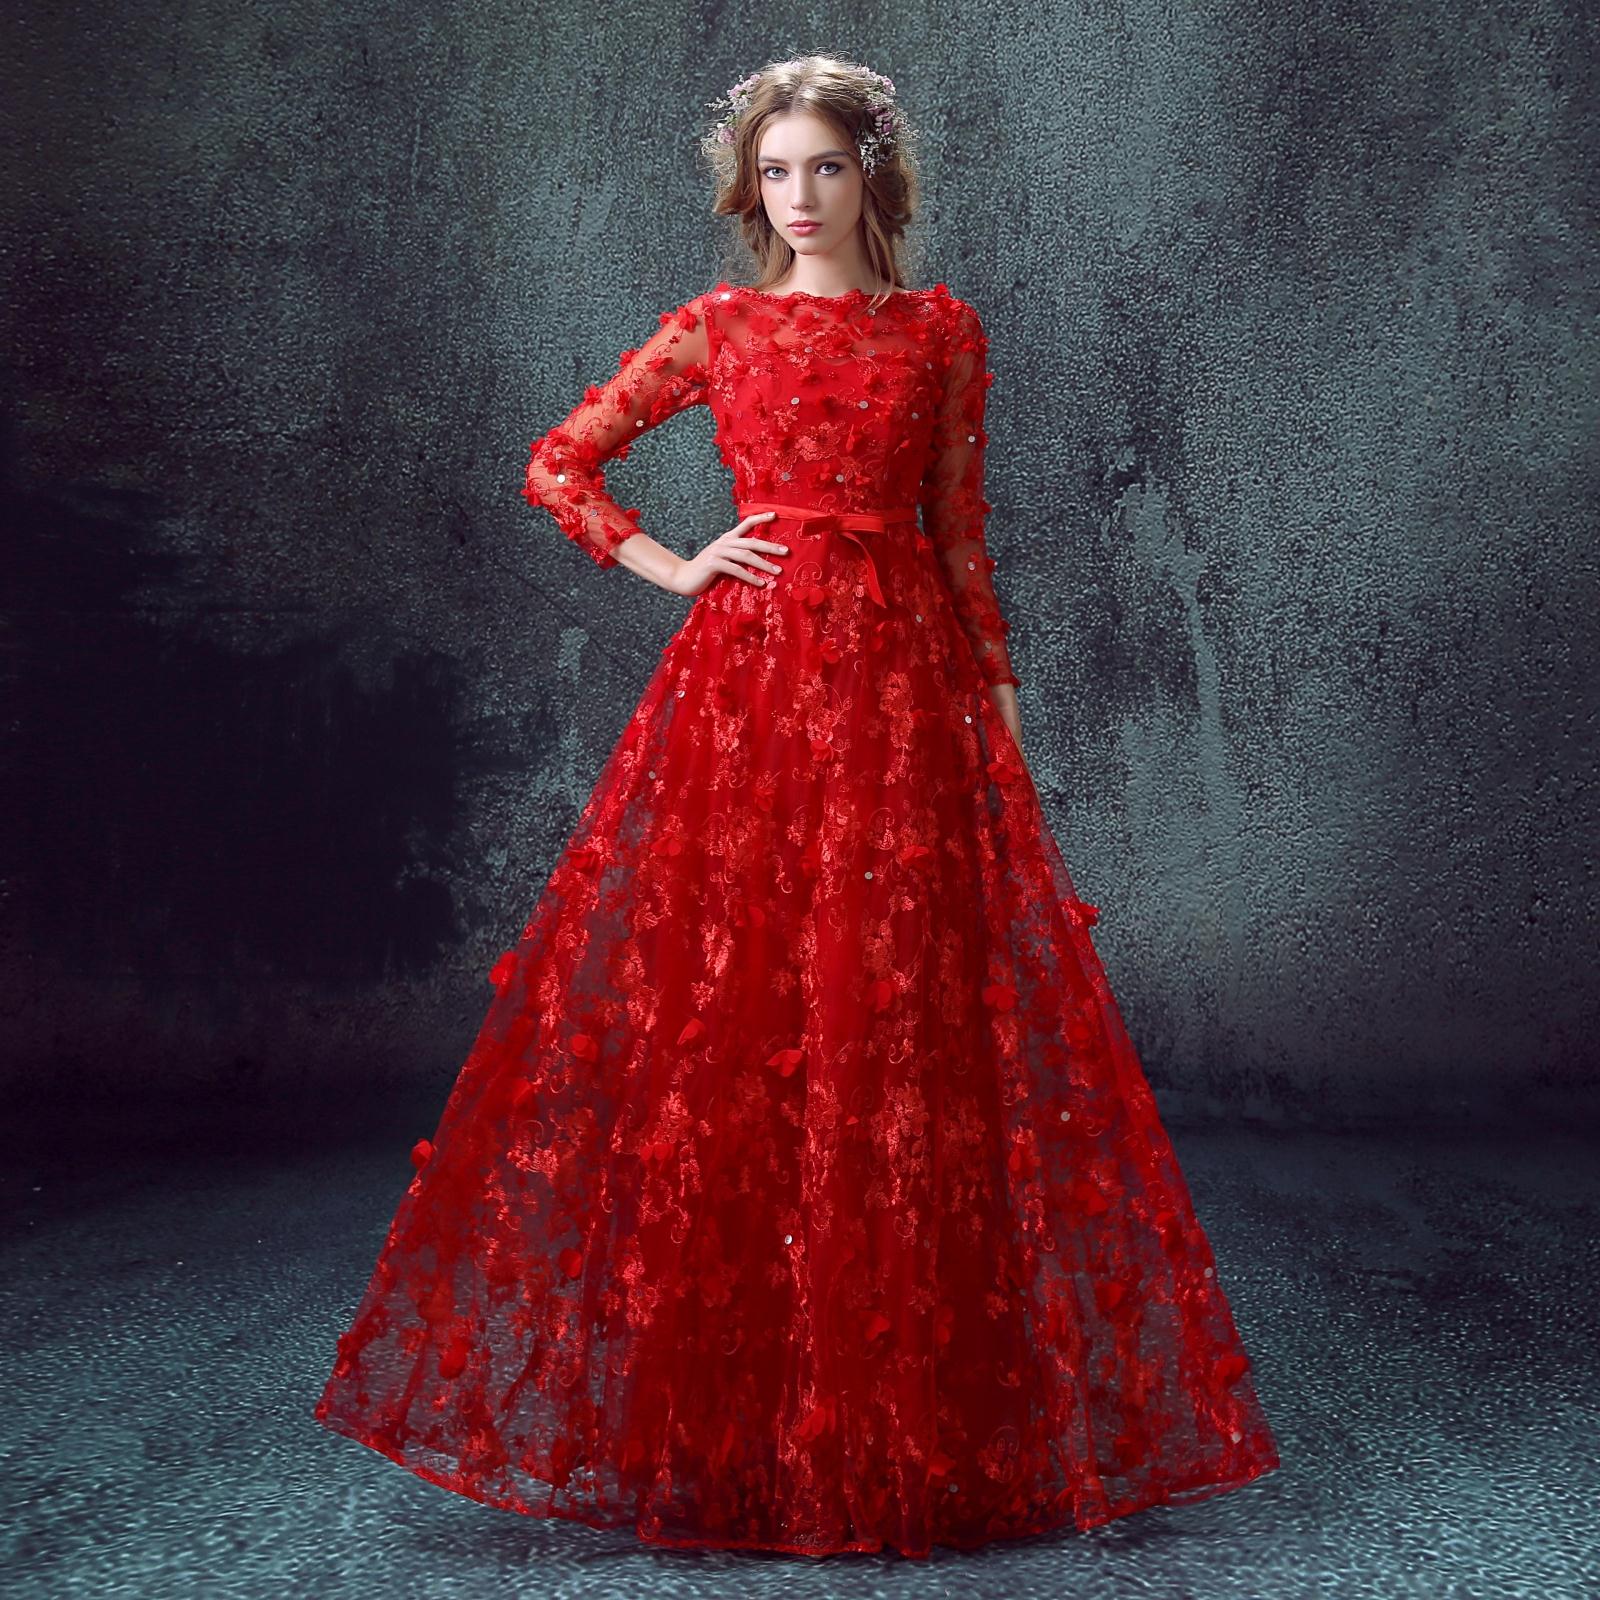 Red Net Gowns Online Shopping for Women at Low Prices